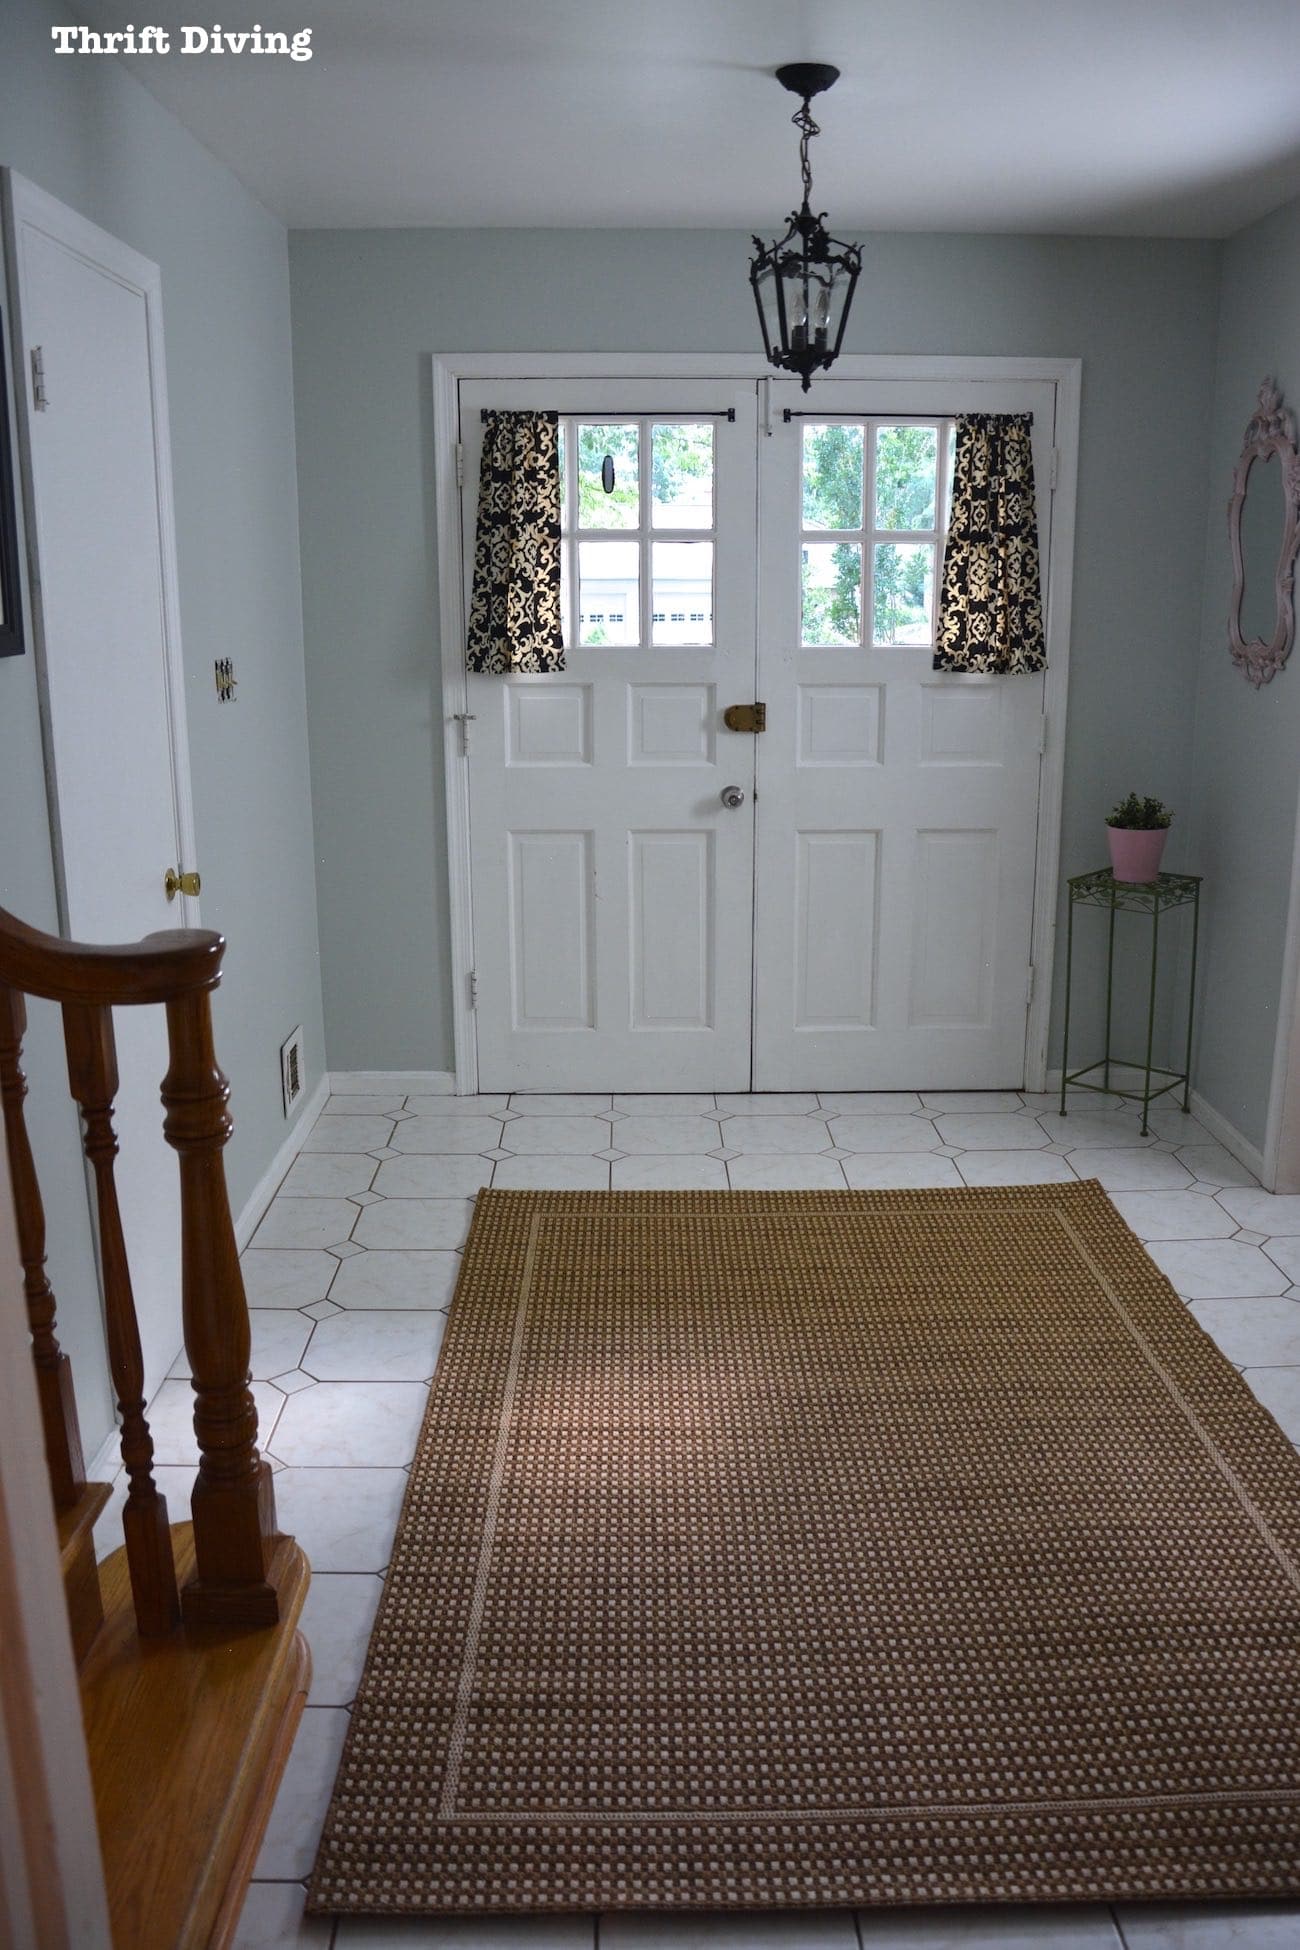 Sherwin Williams Sea Salt and Rainwashed - Sea Salt paint color in a foyer with white doors. - AFTER - Thrift Diving